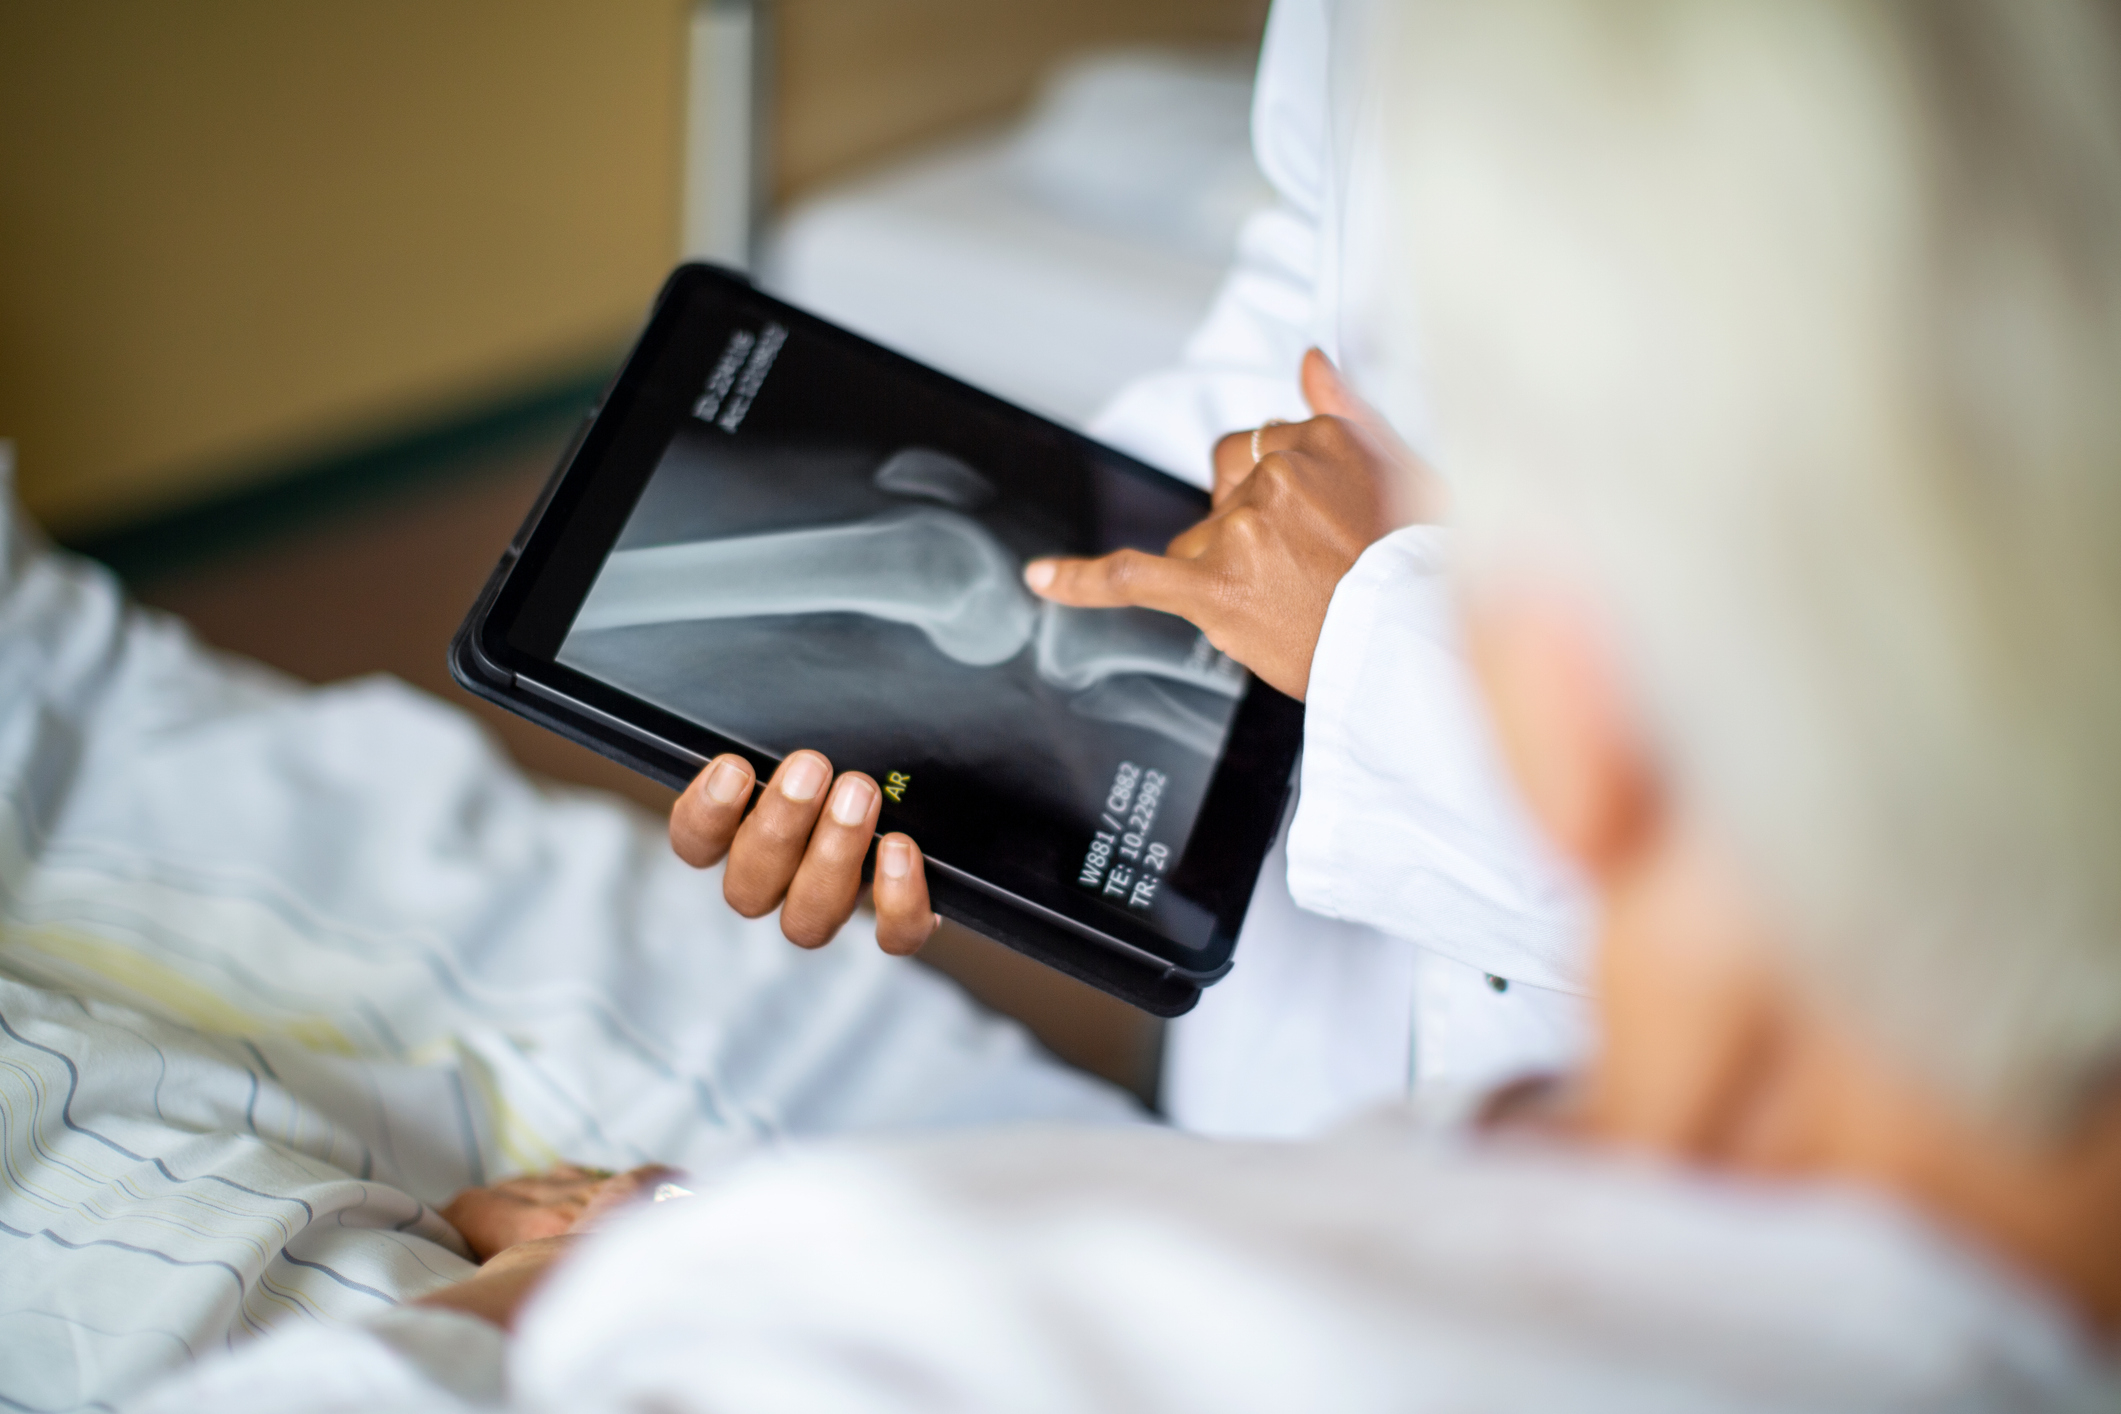 Doctor showing a patient an X-ray on a tablet